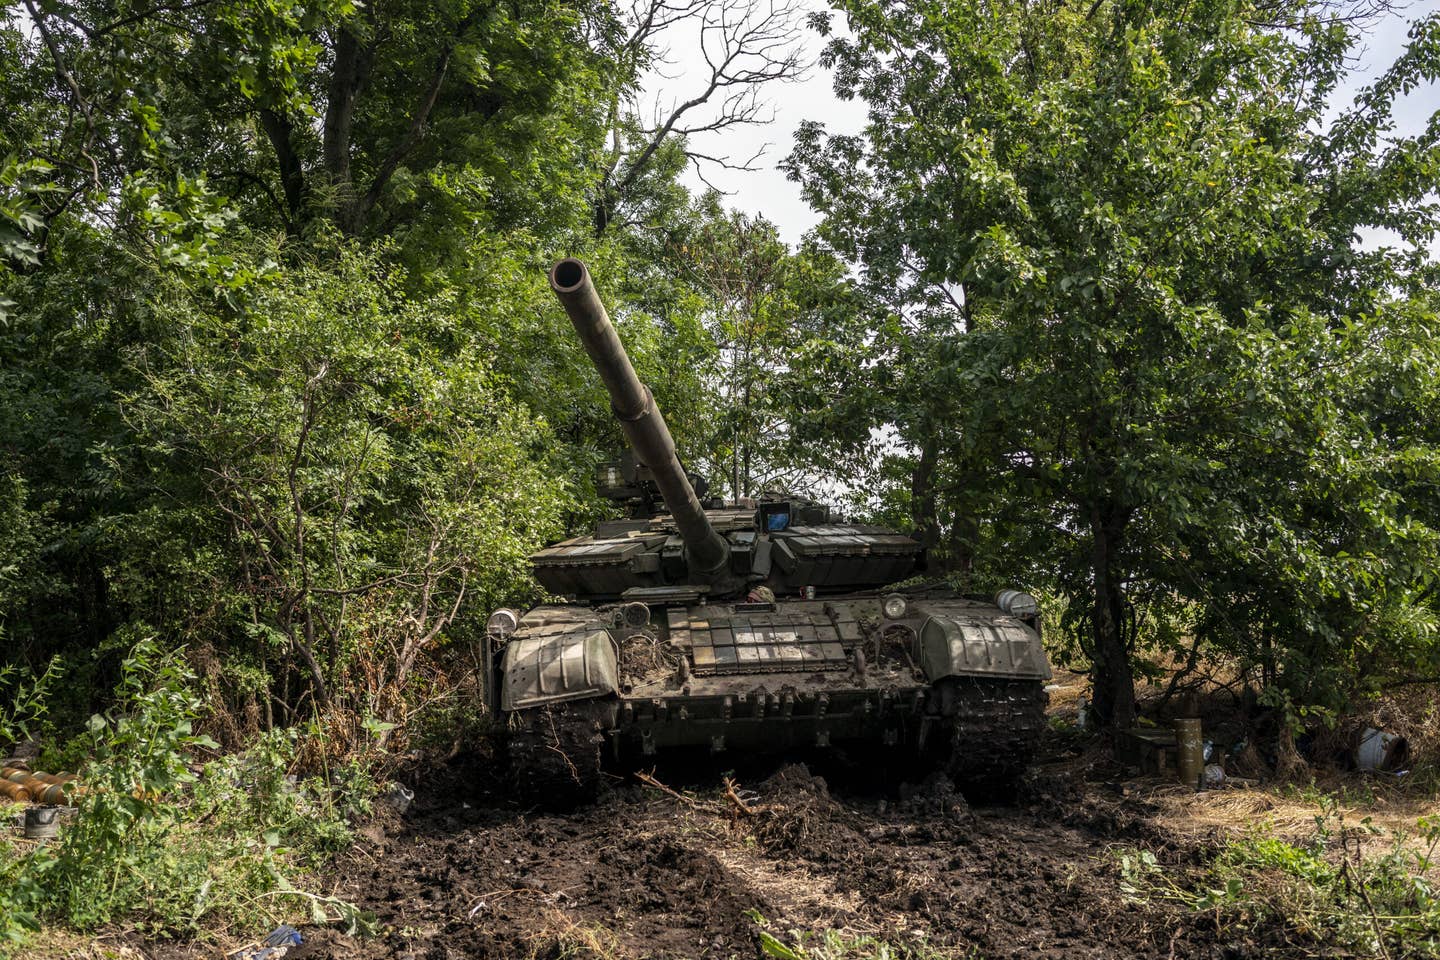 A Ukrainian Armed Forces T-64 tank is prepared by soldiers of the 72nd Brigade, in the direction of Vuhledar, Donetsk Oblast, Ukraine, on July 19, 2023. <em>Photo by Jose Colon/Anadolu Agency via Getty Images</em>